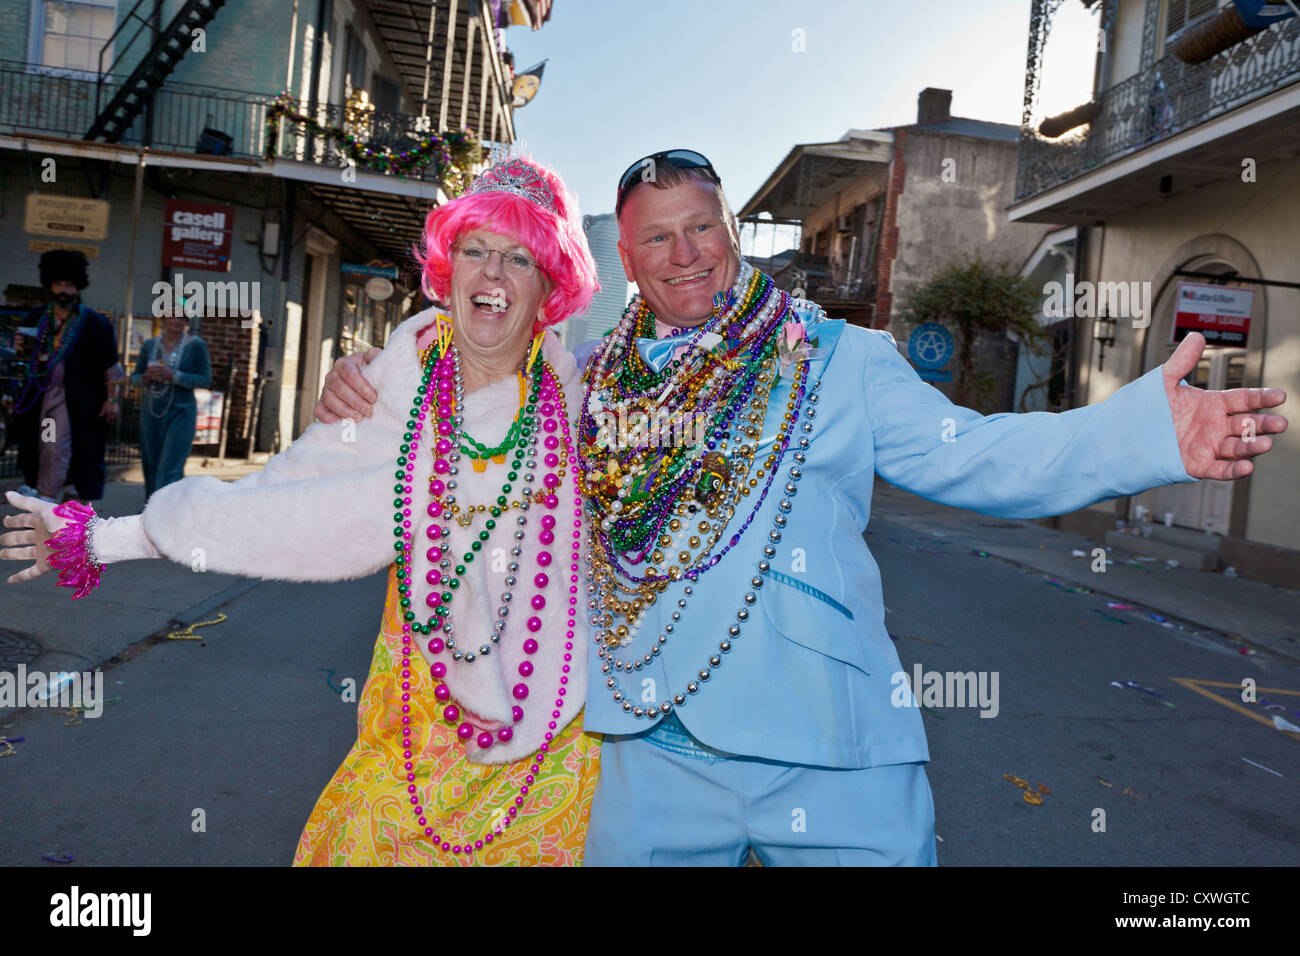 Partying and costumes in French Quarter, Mardi Gras, New Orleans, Louisiana Stock Photo